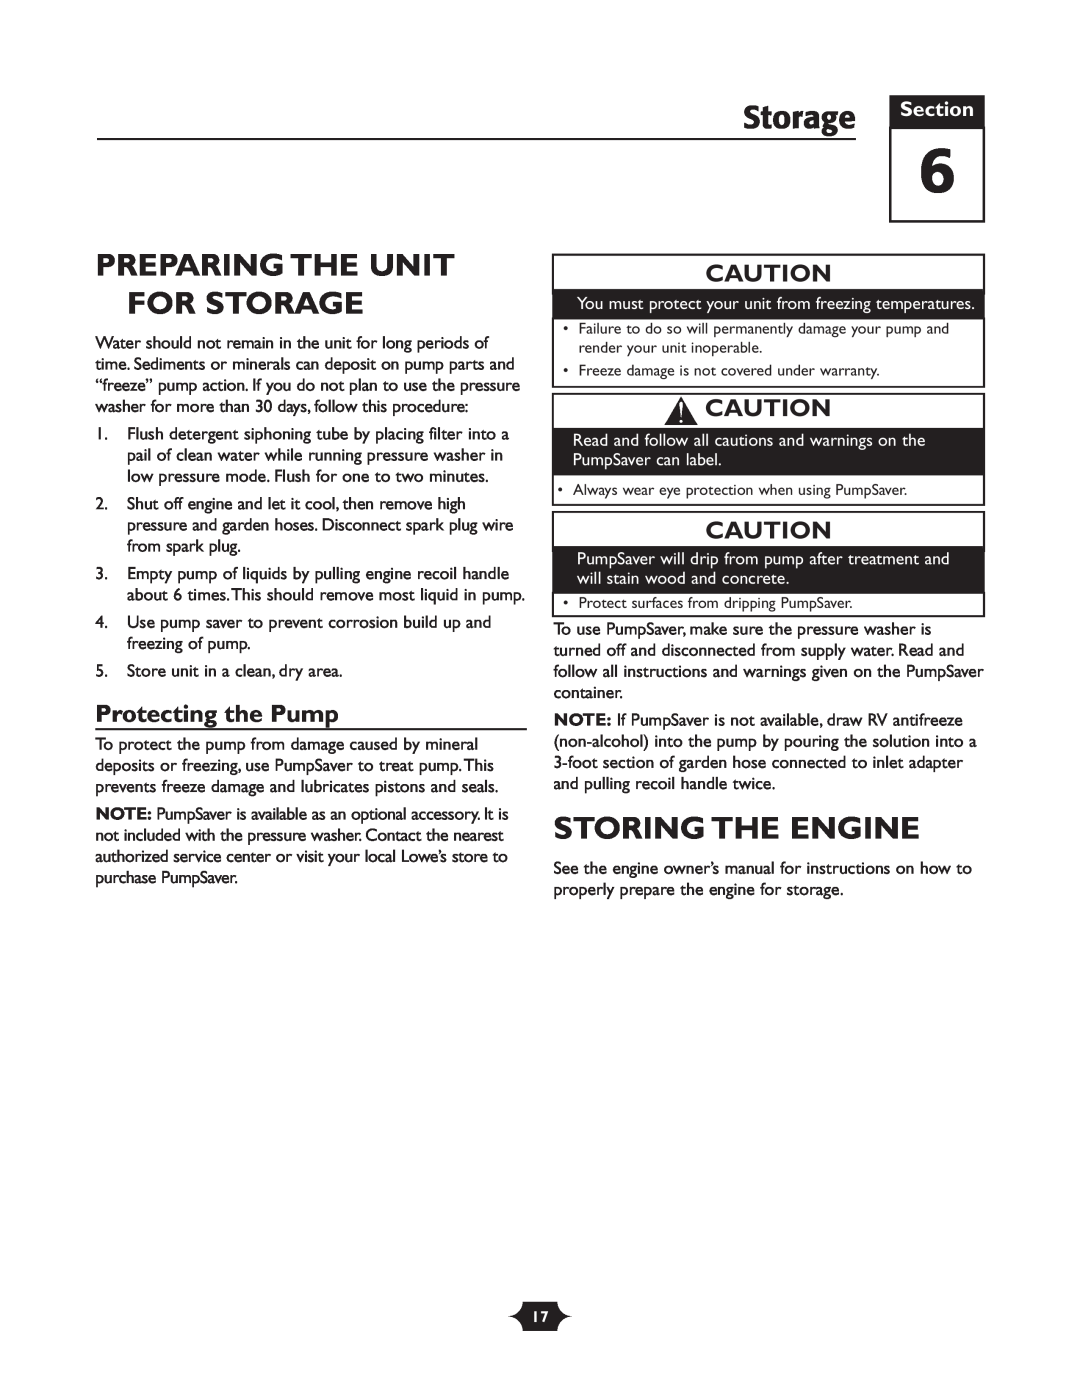 Troy-Bilt 020242-1 owner manual Preparing The Unit For Storage, Storing The Engine, Protecting the Pump, Section 